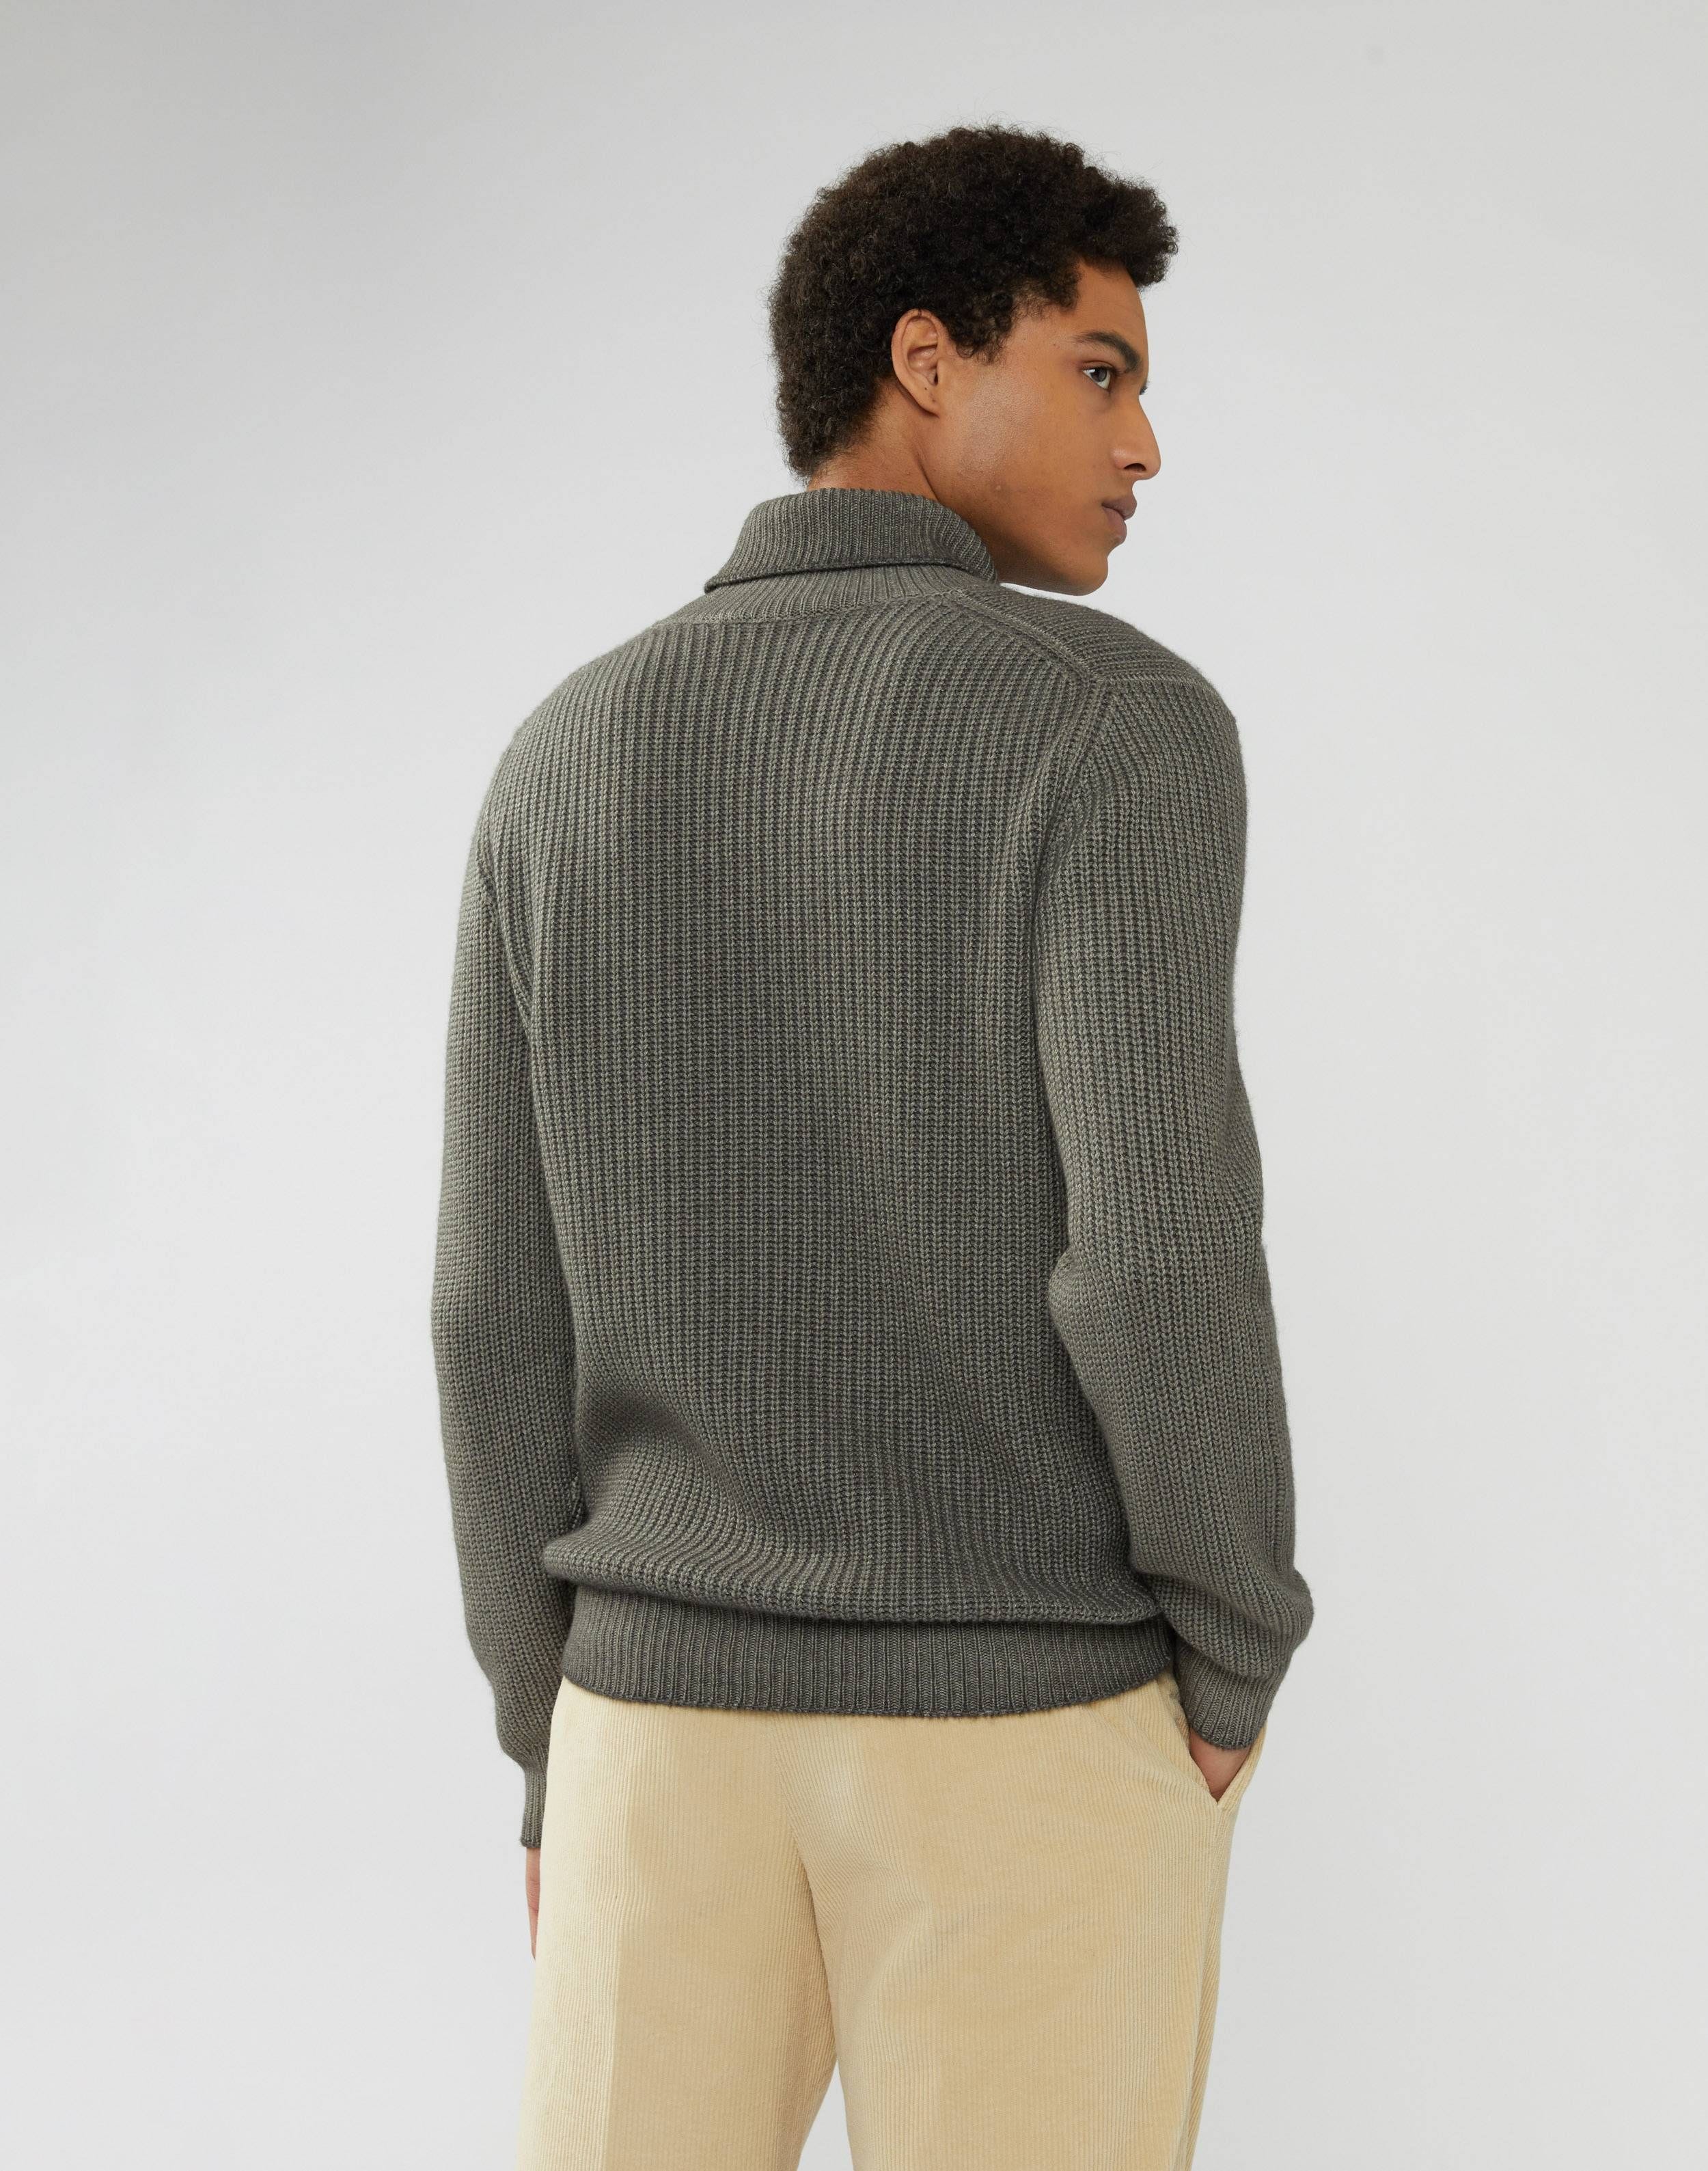 Green turtleneck in cloud-soft cashmere